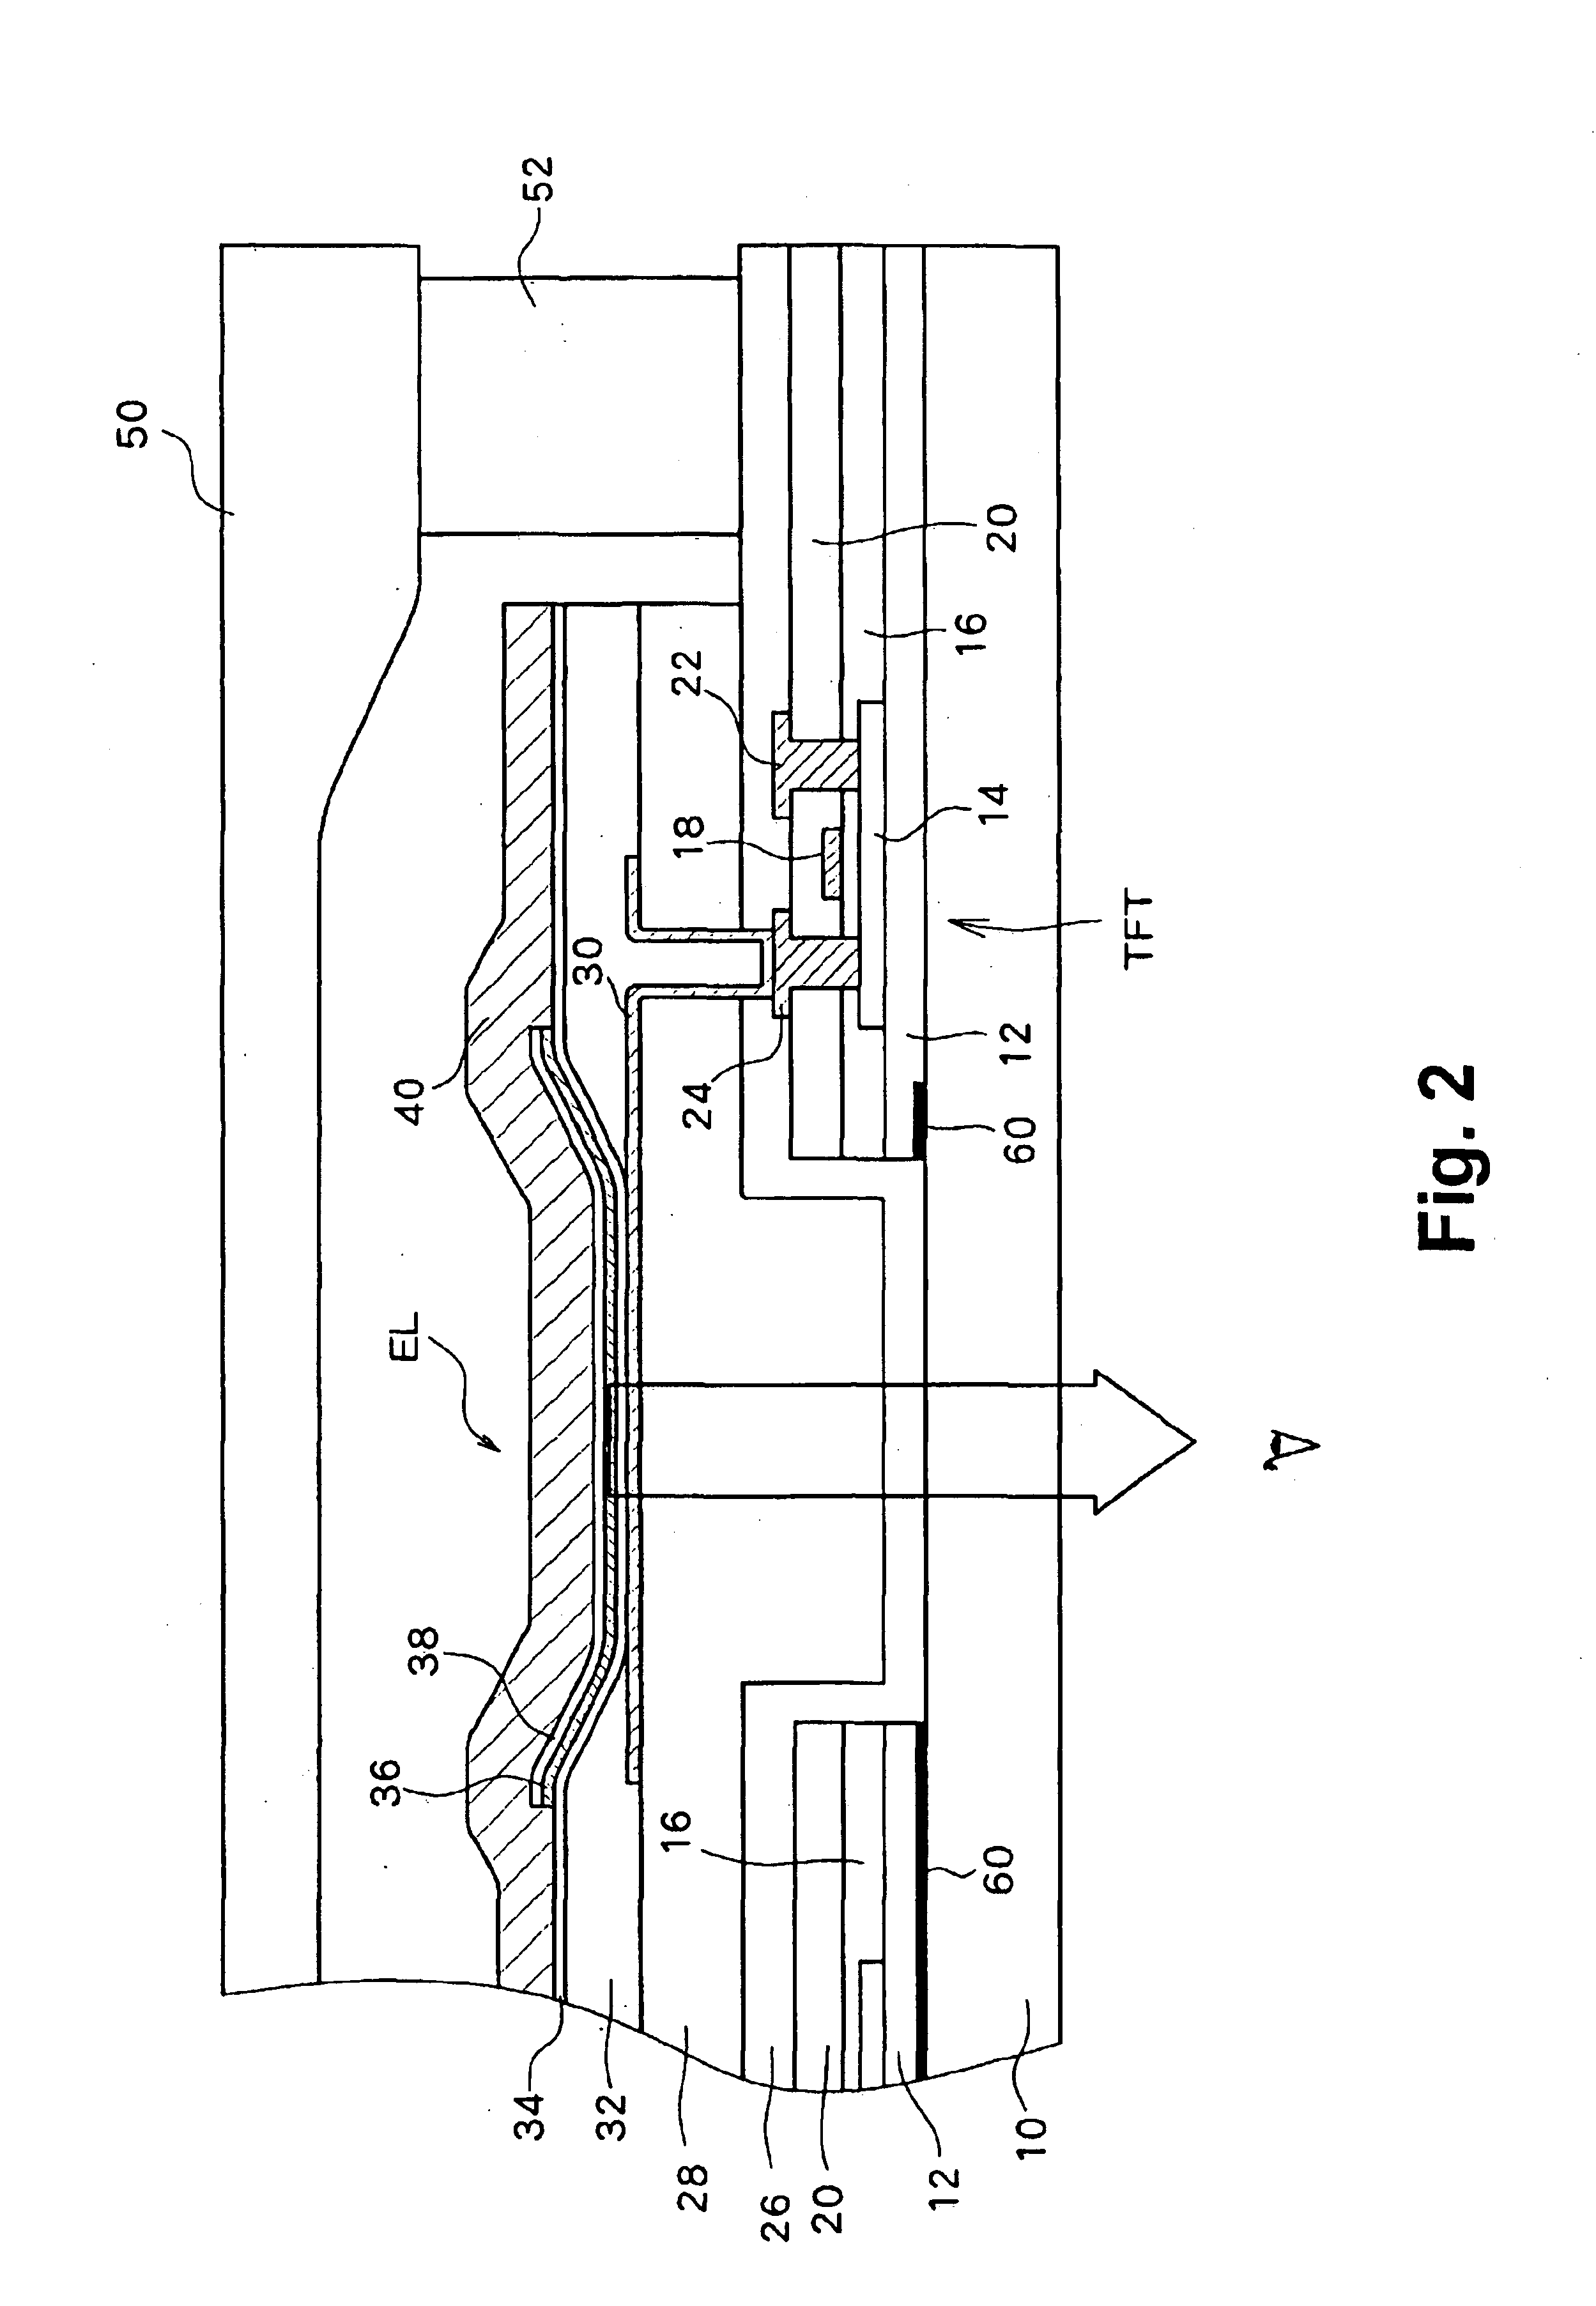 Electroluminescence display apparatus with opening in silicon oxide layer